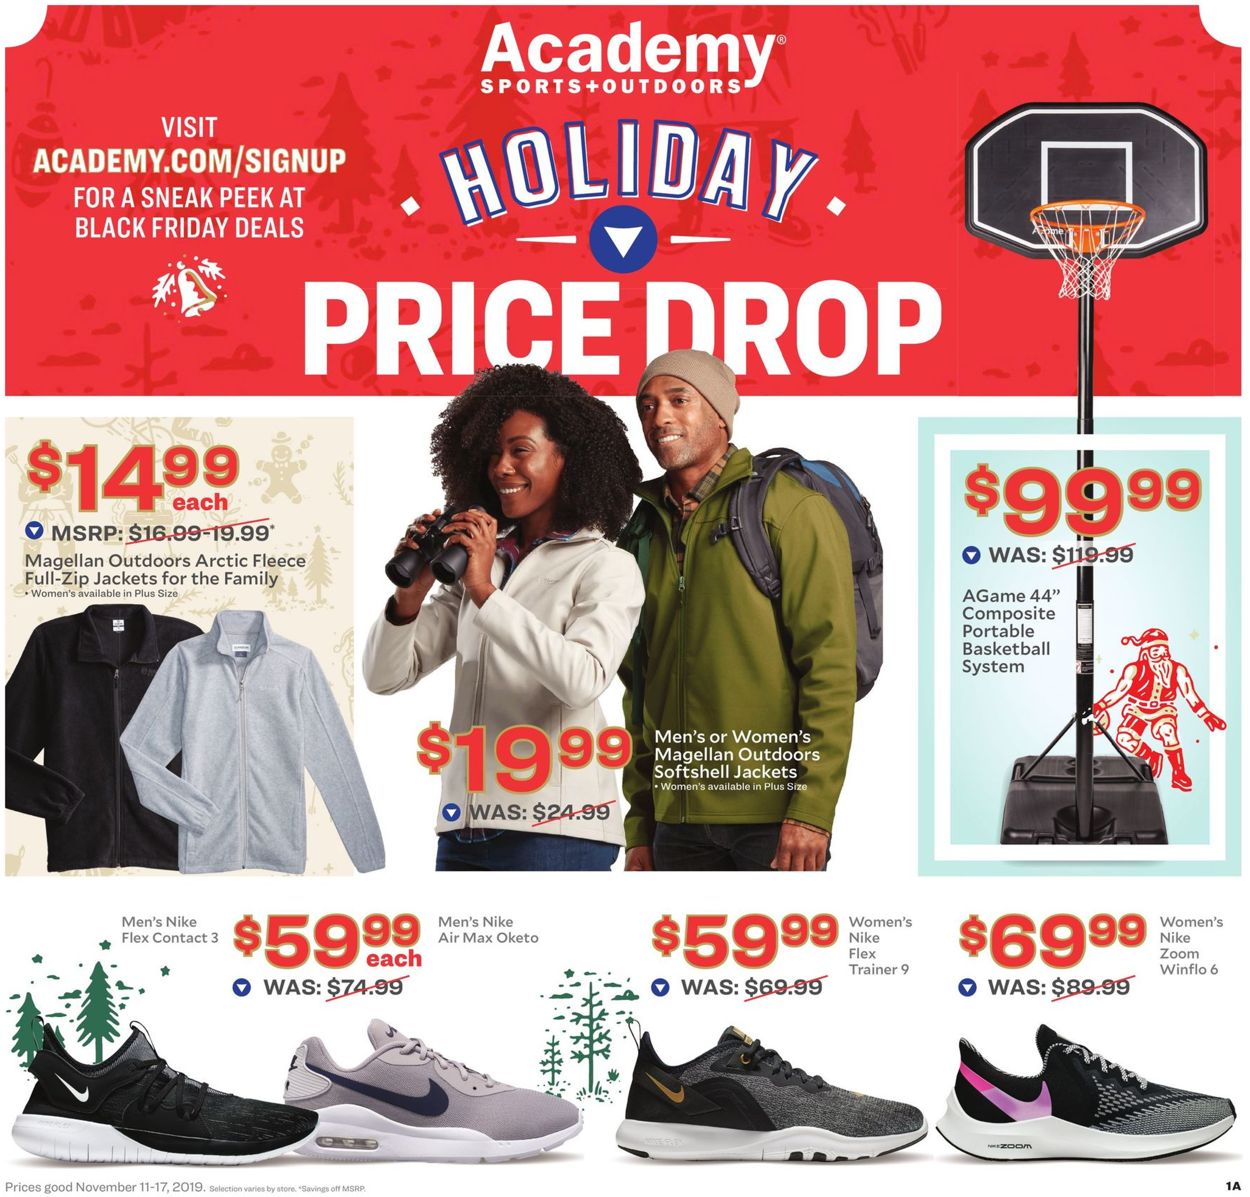 shoe carnival weekly ad 2018